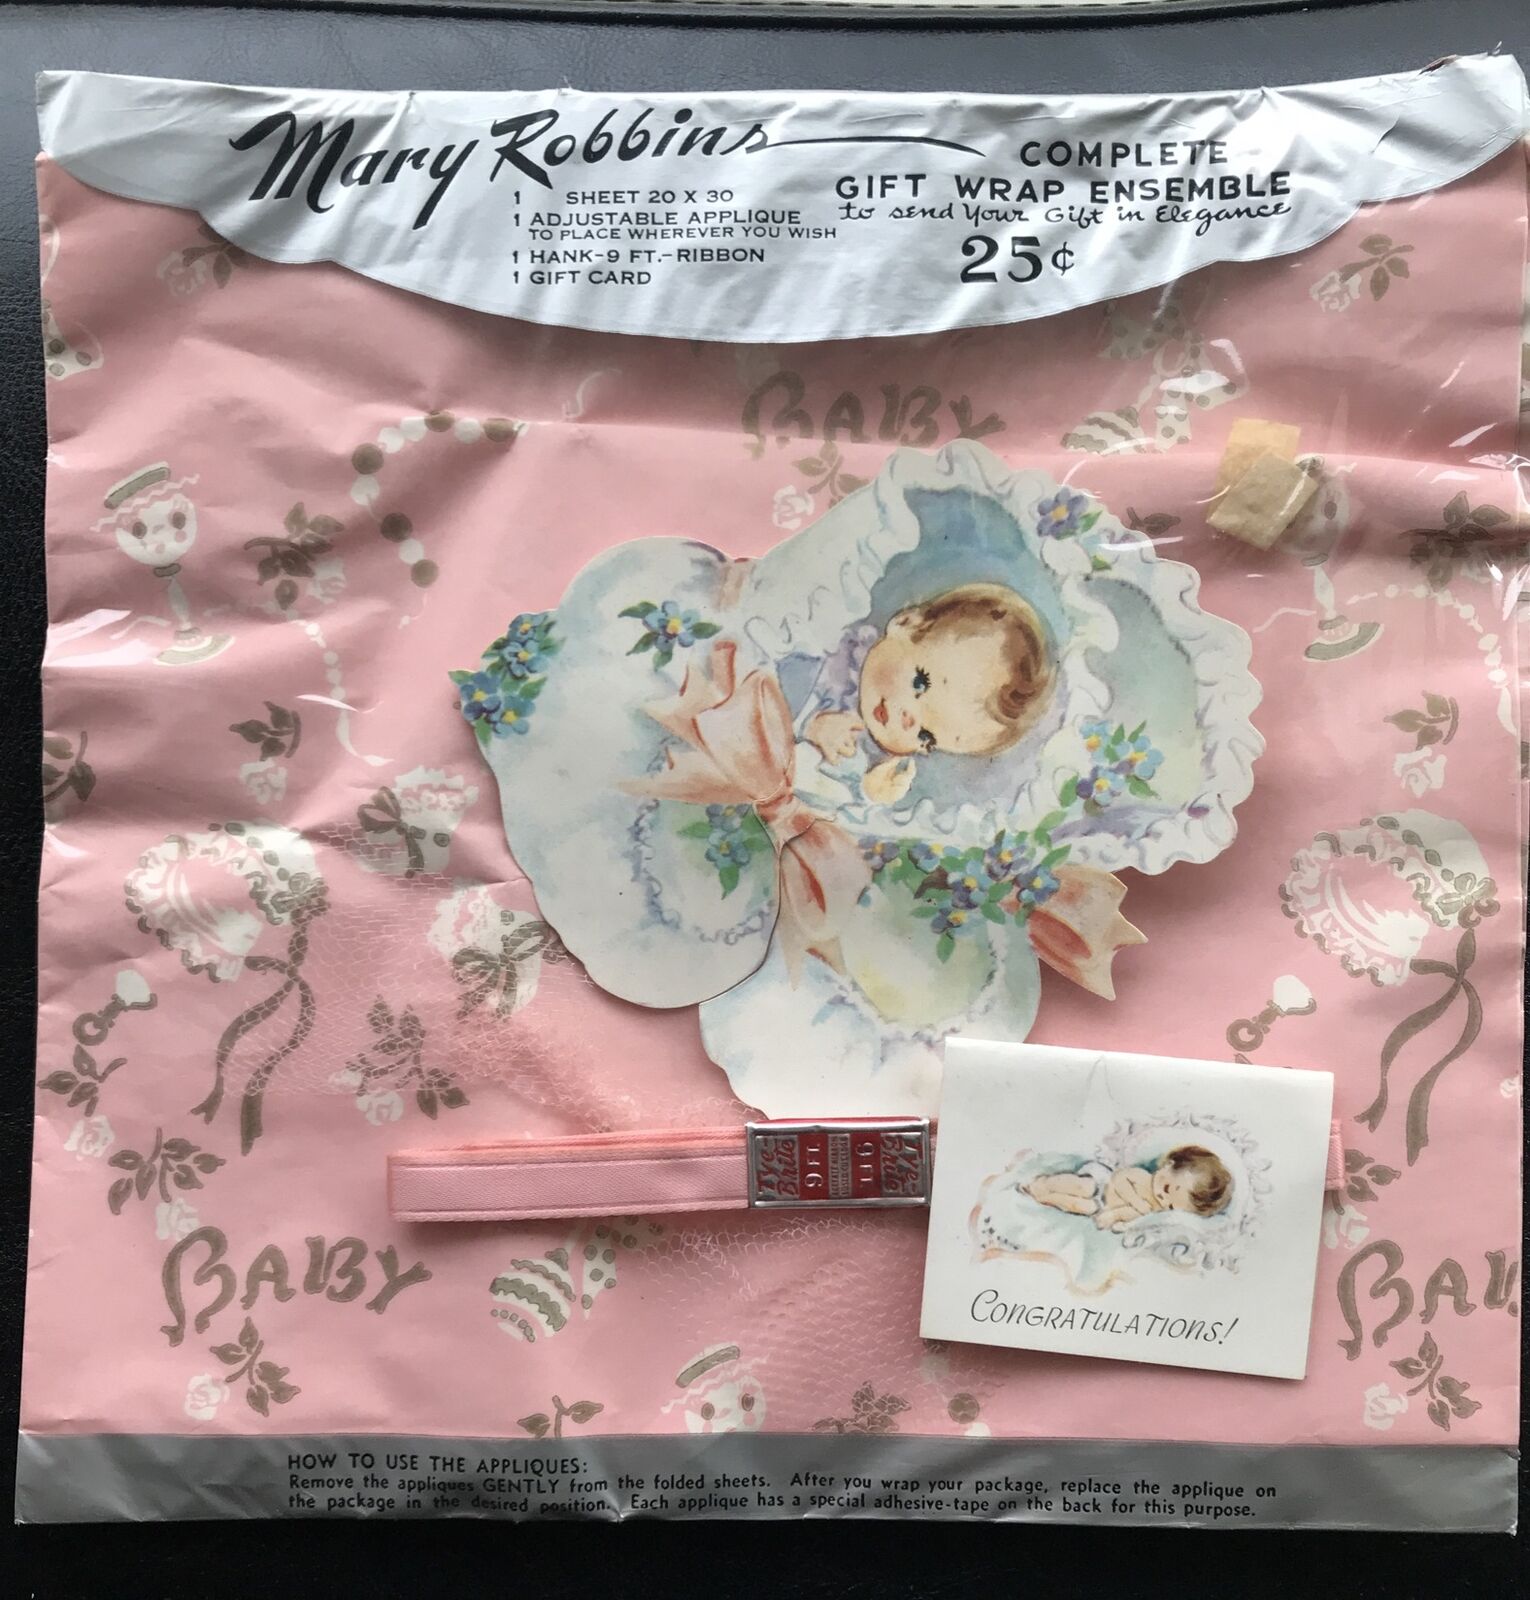 VTG 1960s MARY ROBBINS GIFT WRAP IN PACKAGE BABY SHOWER  TAG & RIBBON & APPLIQUÉ